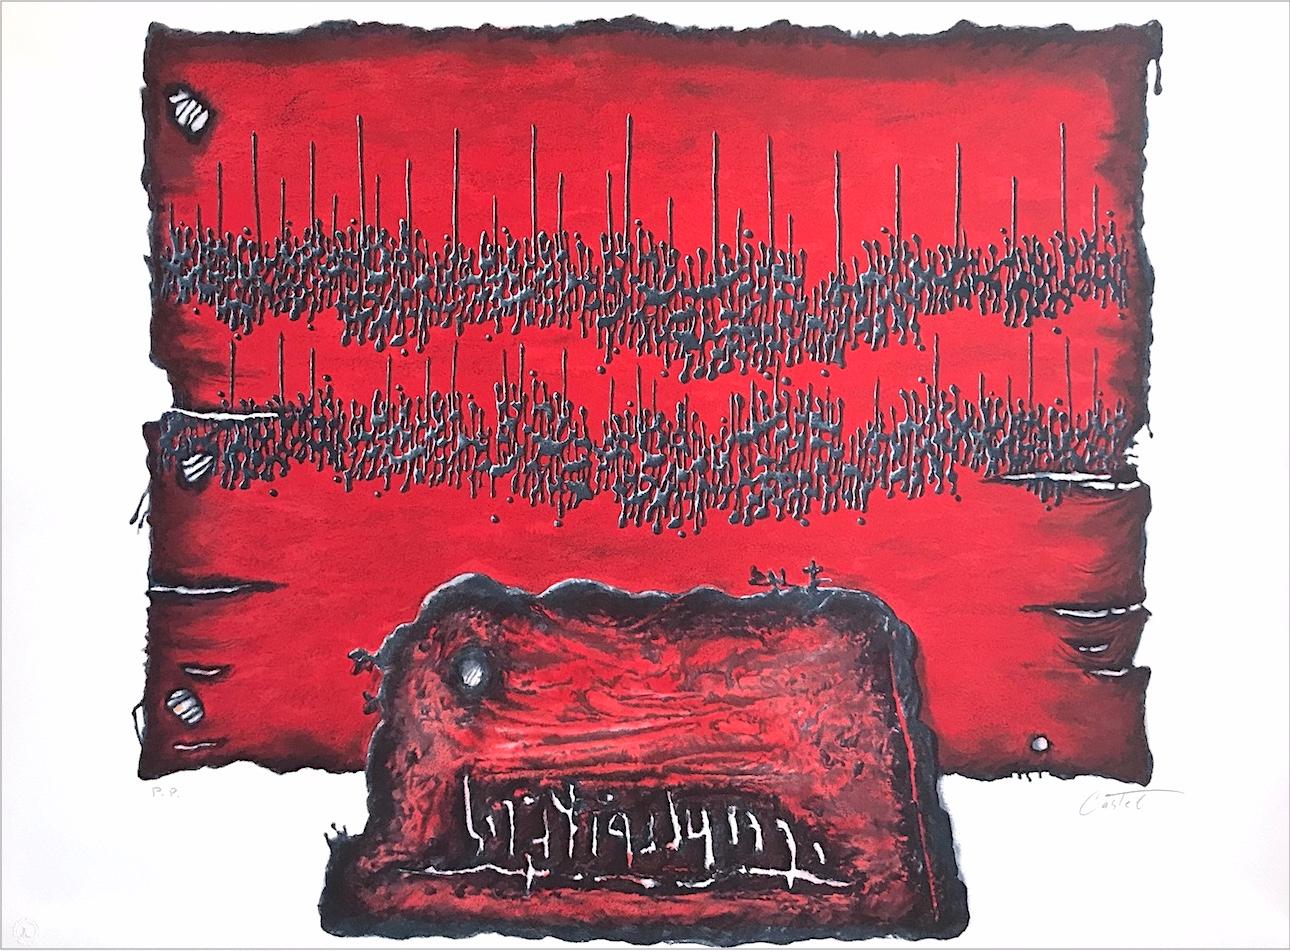 HALLELUJAH TO PEACE Signed Lithograph, Stone Tablet, Abstract Ancient Writing